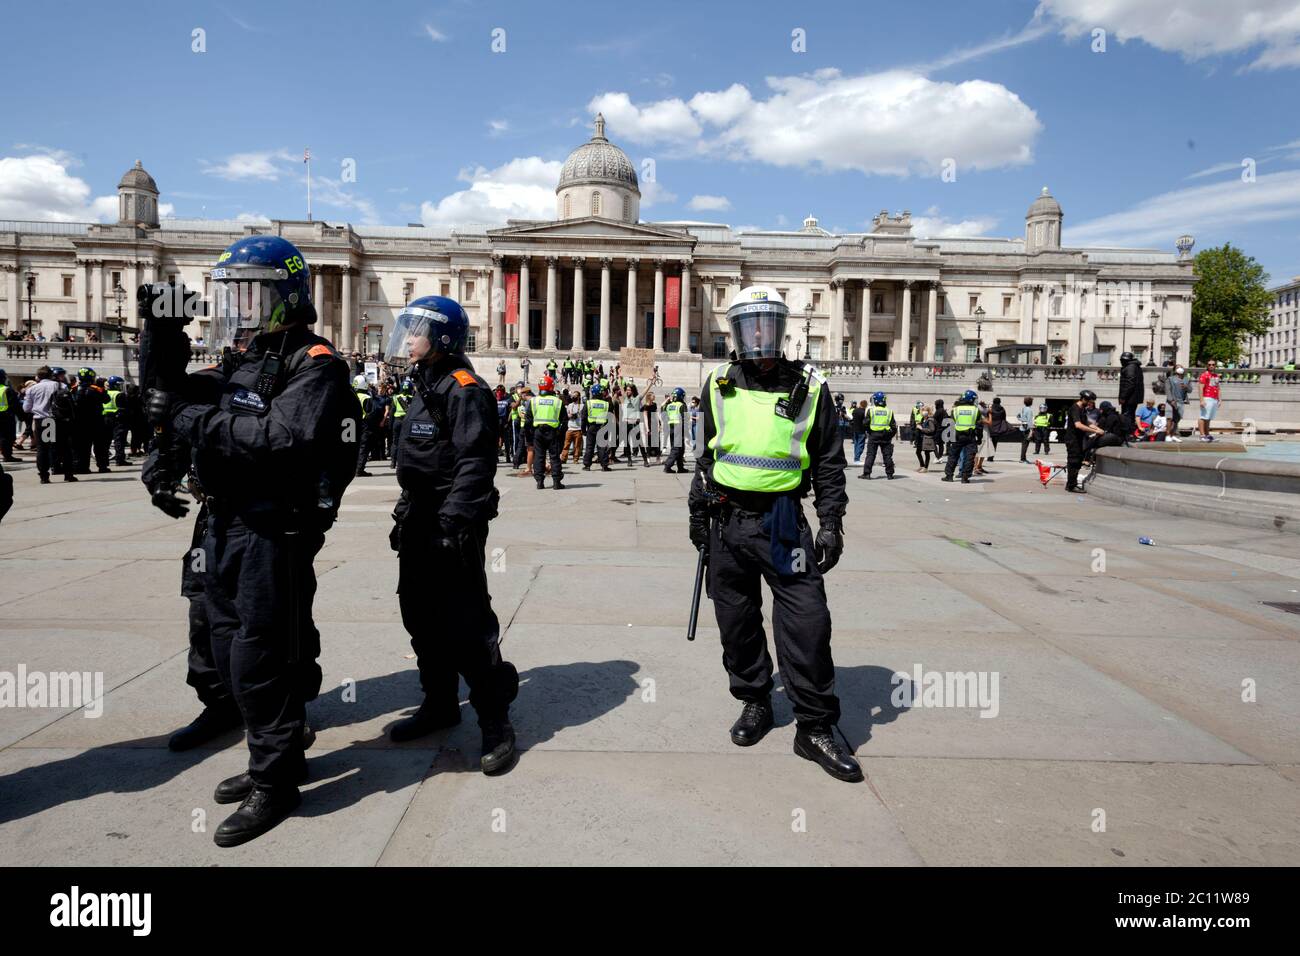 The police confront a right wing mob attempting to disrupt a Black Lives Matter protest in Trafalgar Square Stock Photo